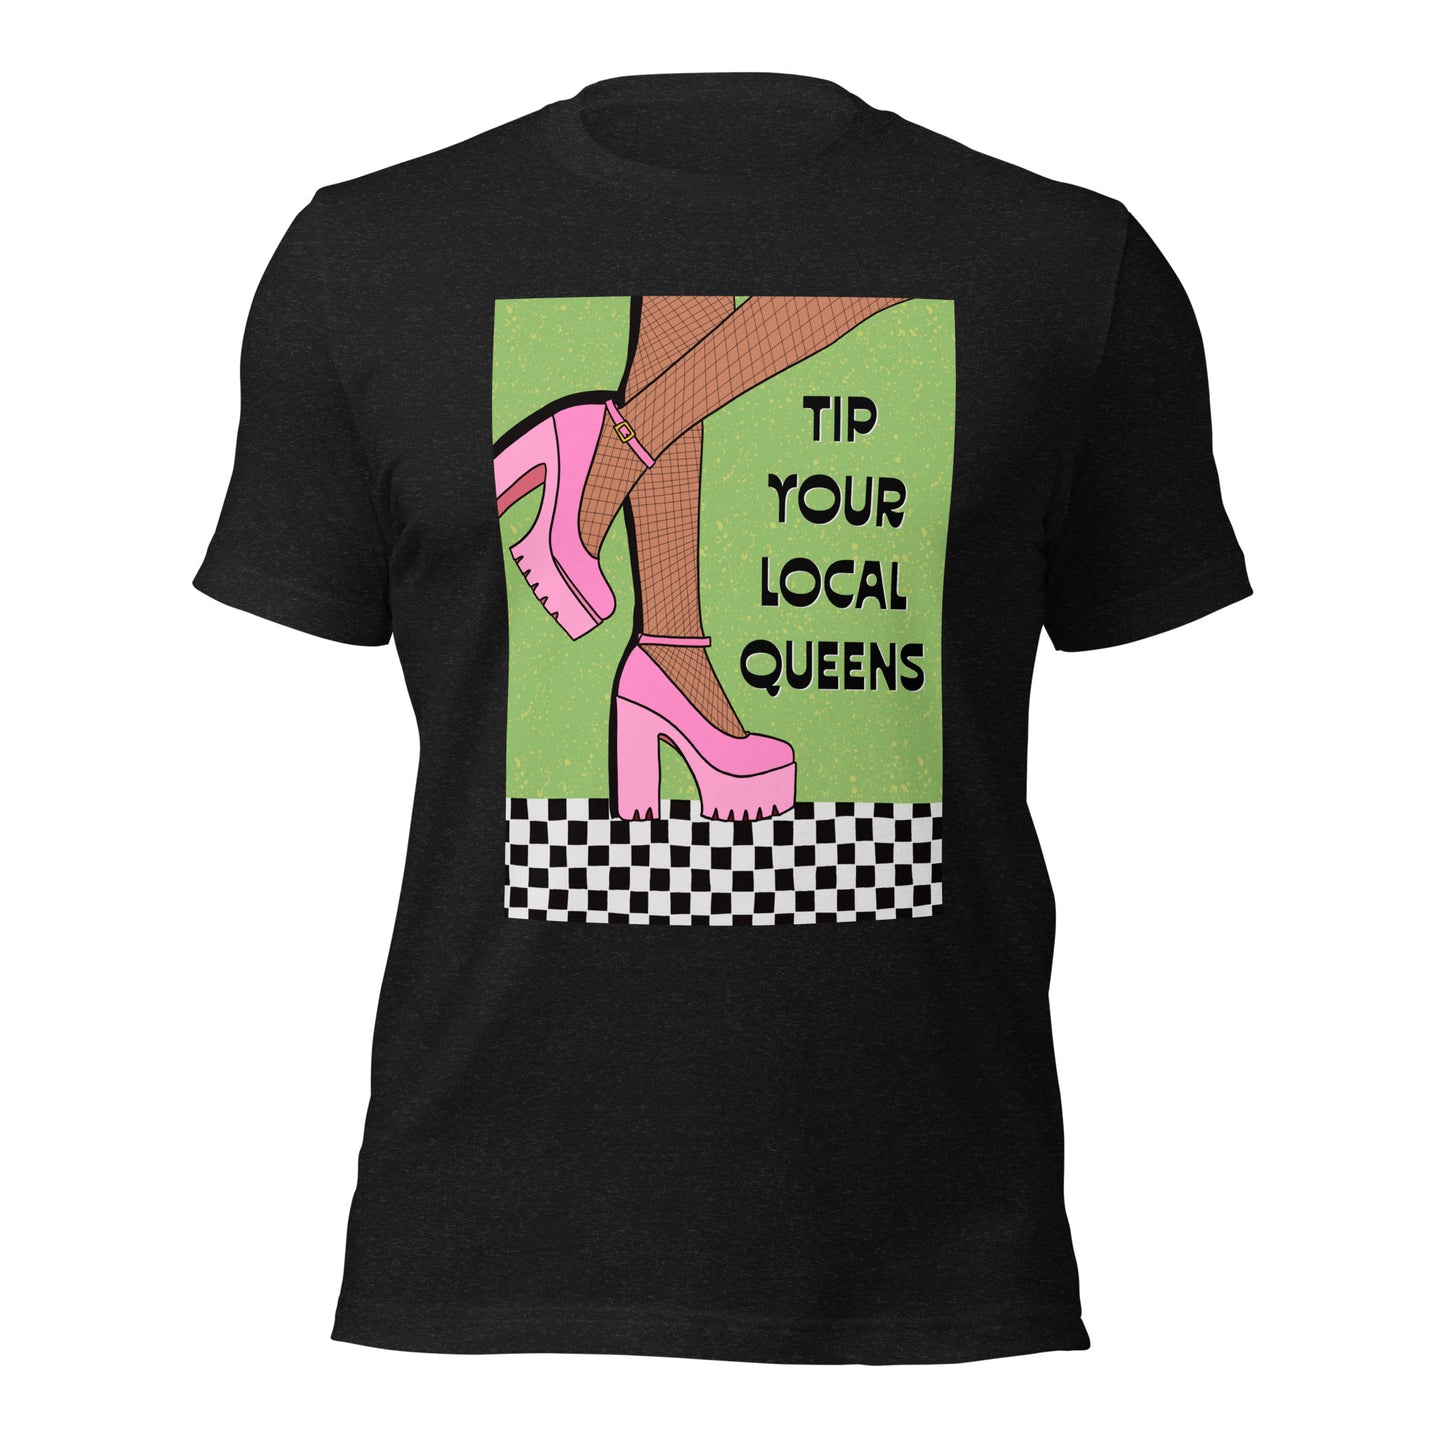 Tip Your Local Queens T-Shirt (Multiple Color Options)